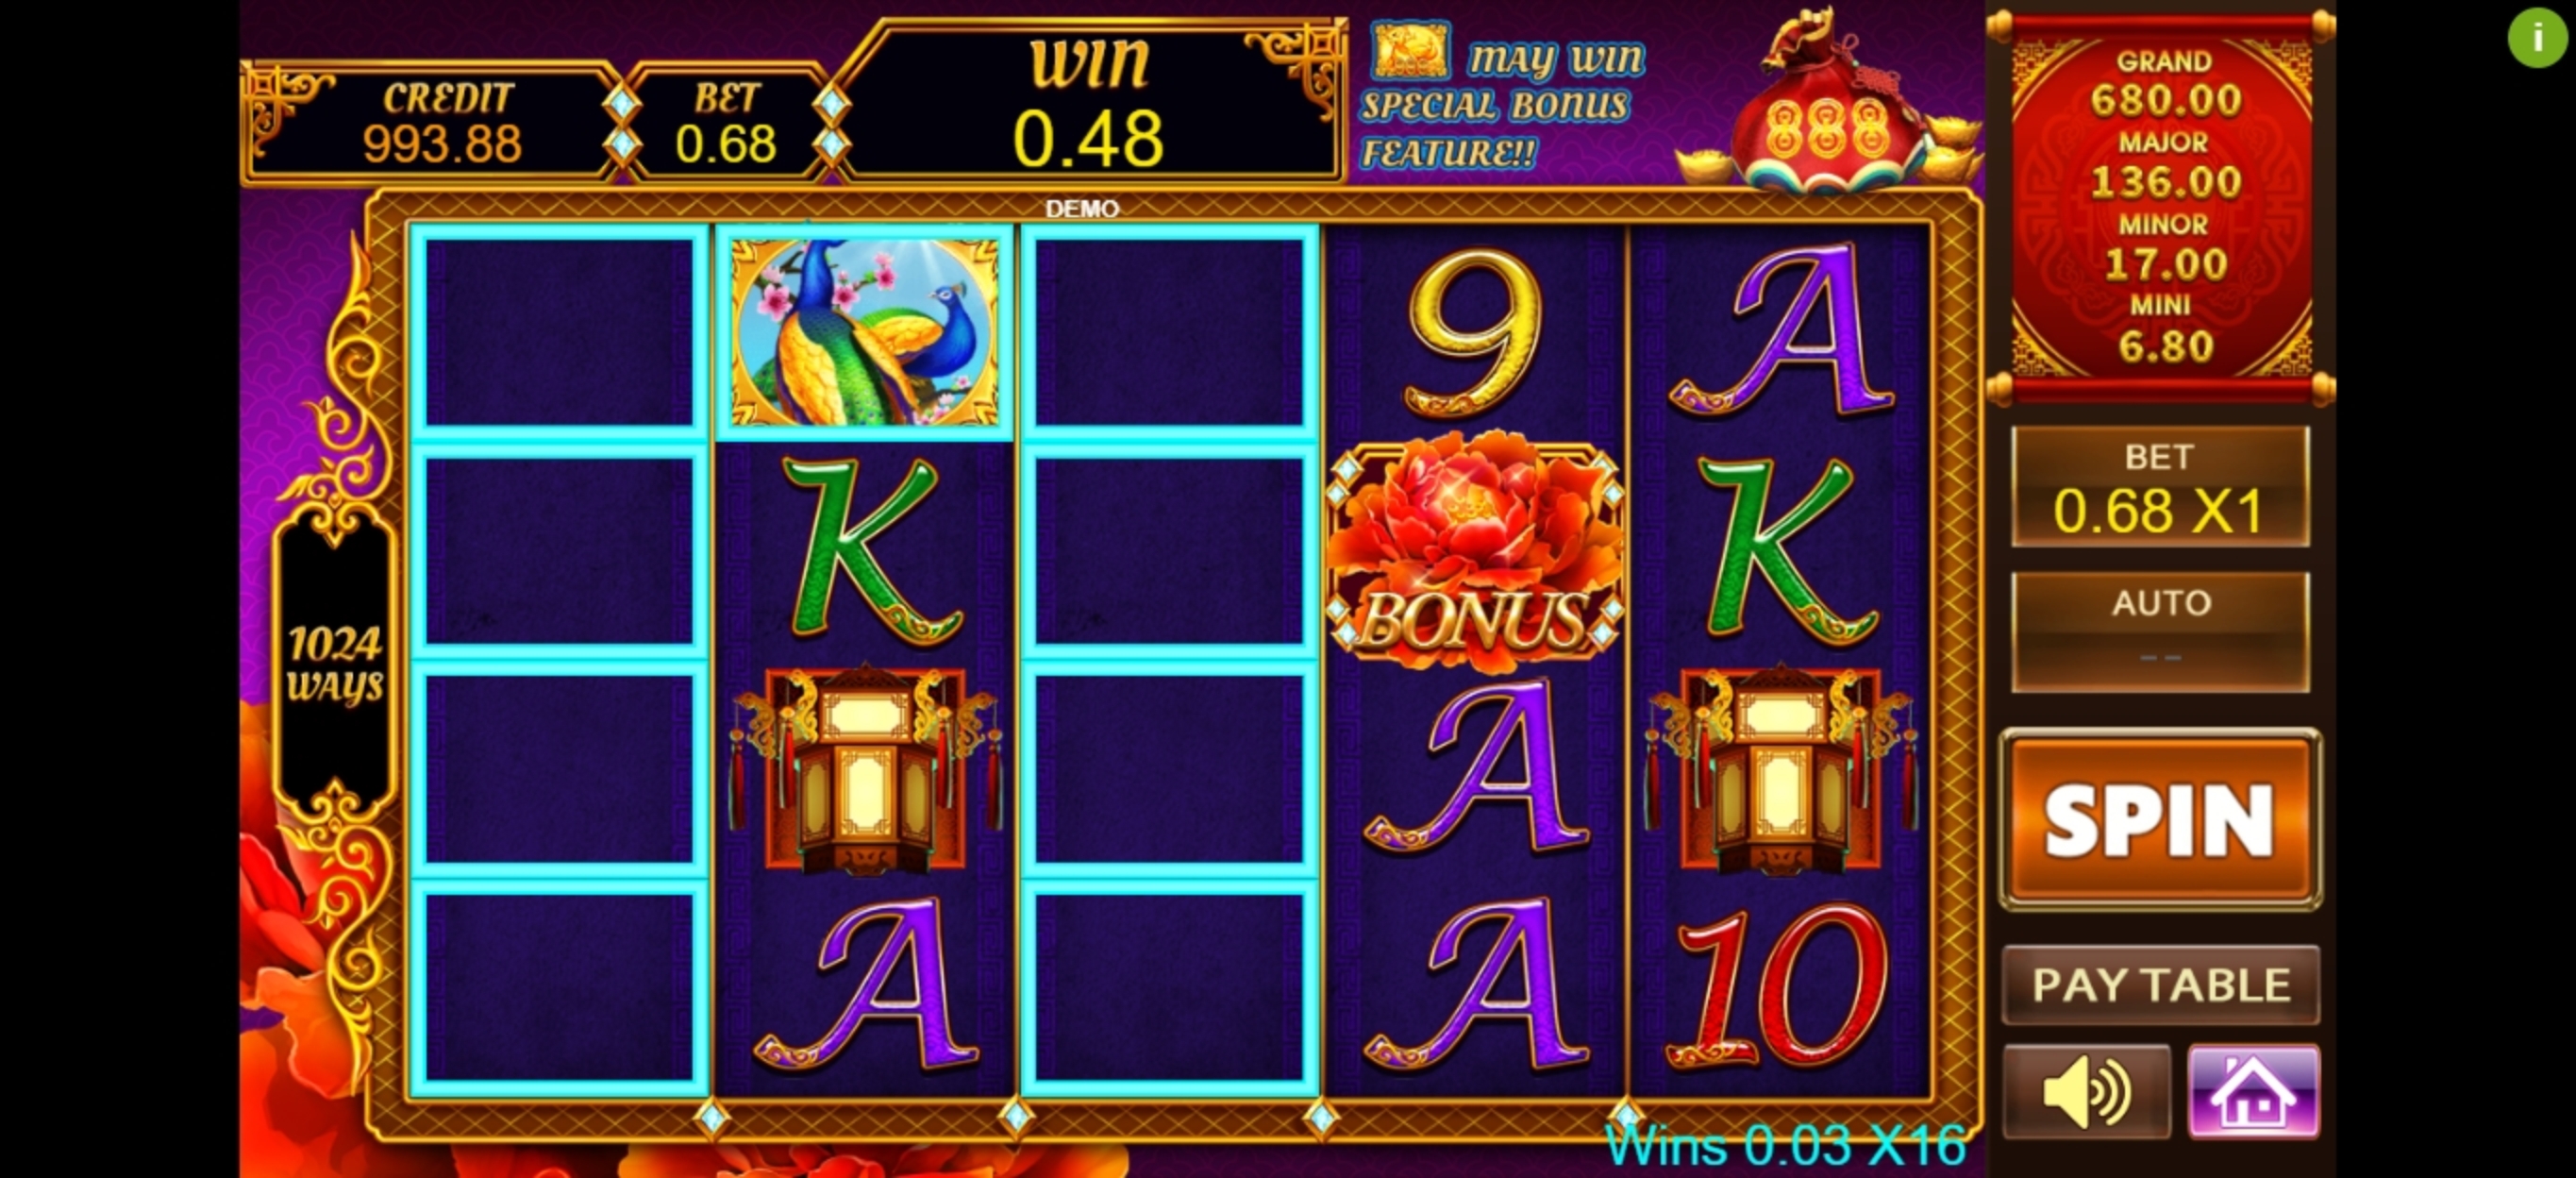 Win Money in Peacock King 2 Free Slot Game by PlayStar